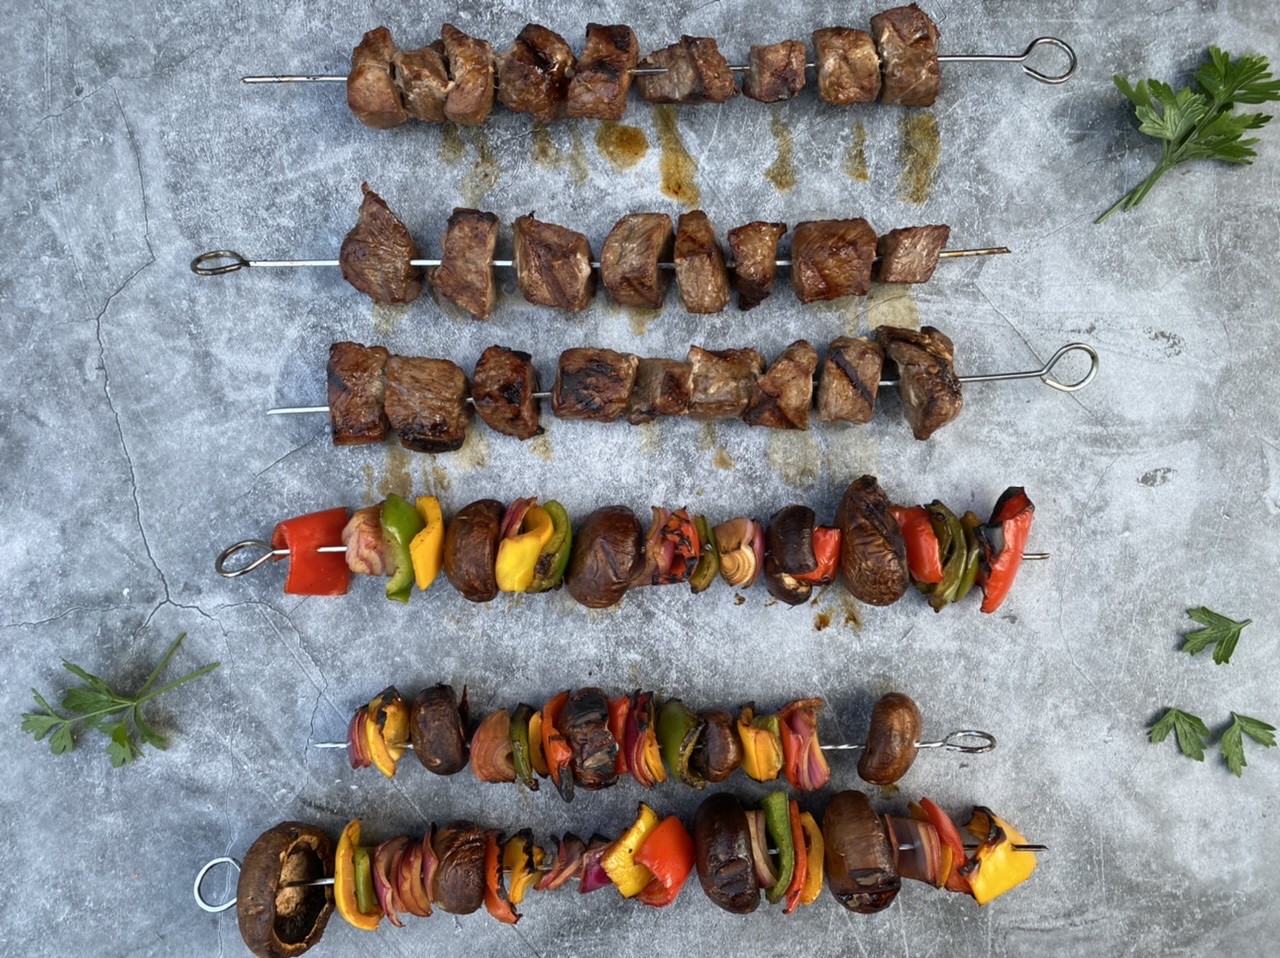 E1DCCC3C 6229 4DCF 8B95 CDF715A747CE - Amazing Vitamin Packed Steakhouse Shish Kebabs with Charred Vegetables